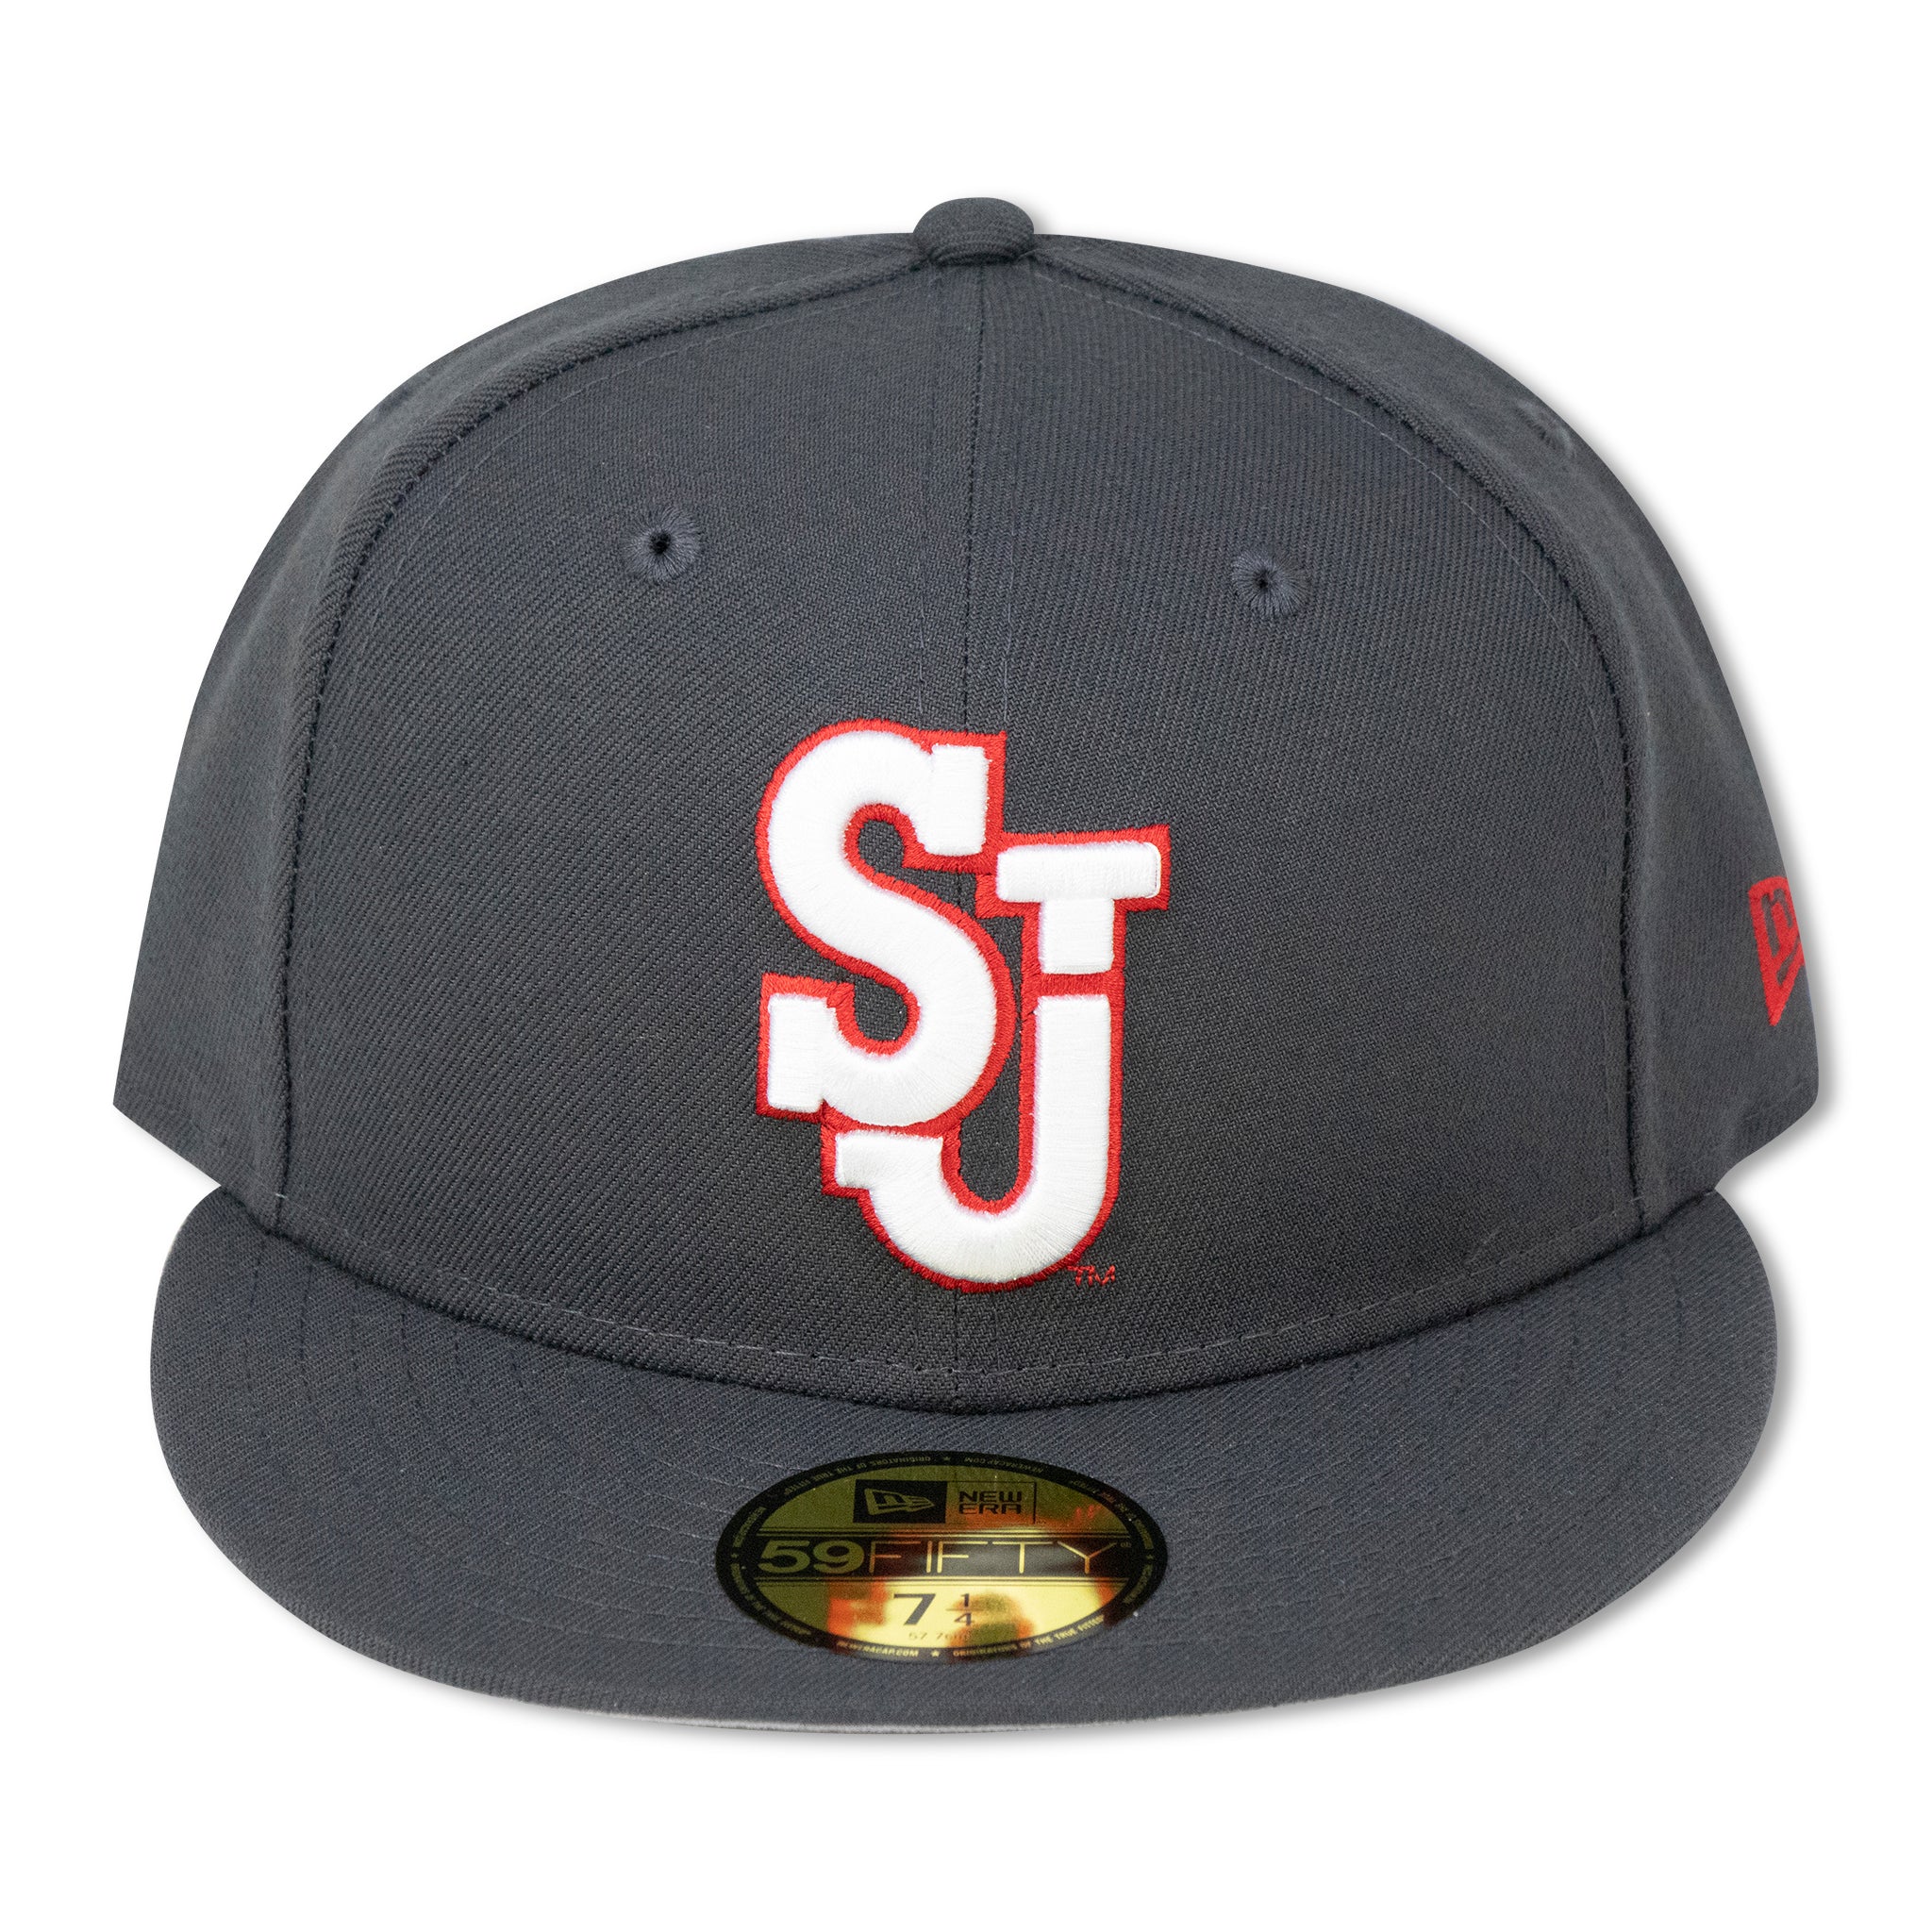 ST. JOHNS REDSTORMS (GREY)NEW ERA 59FIFTY FITTED